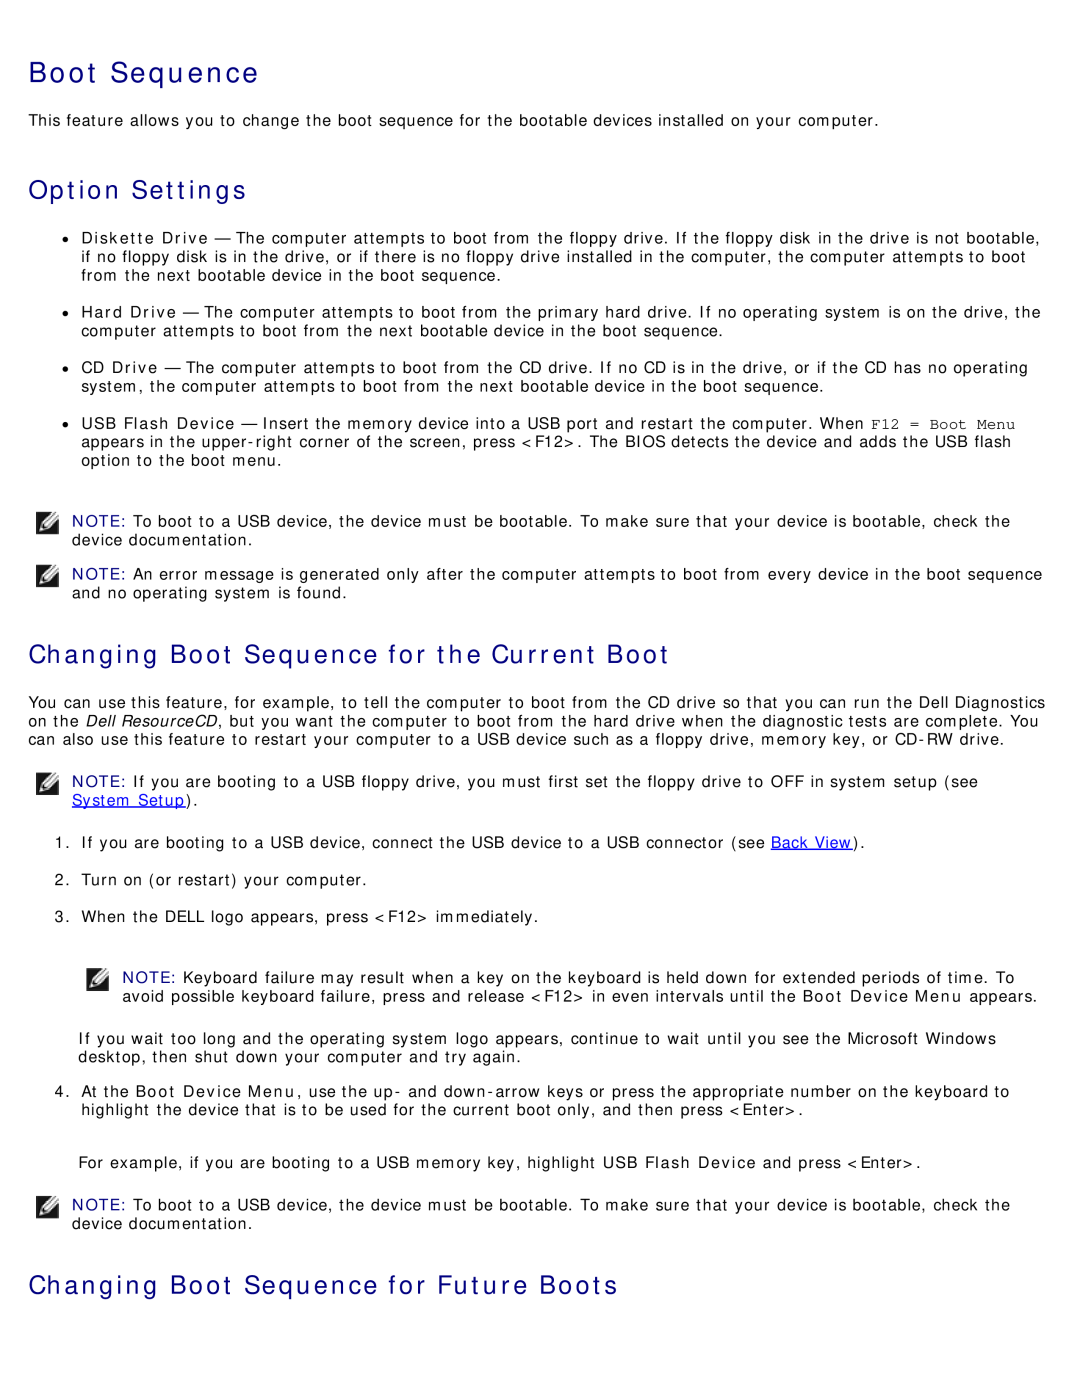 Dell DCDO Option Settings, Changing Boot Sequence for the Current Boot, Changing Boot Sequence for Future Boots 